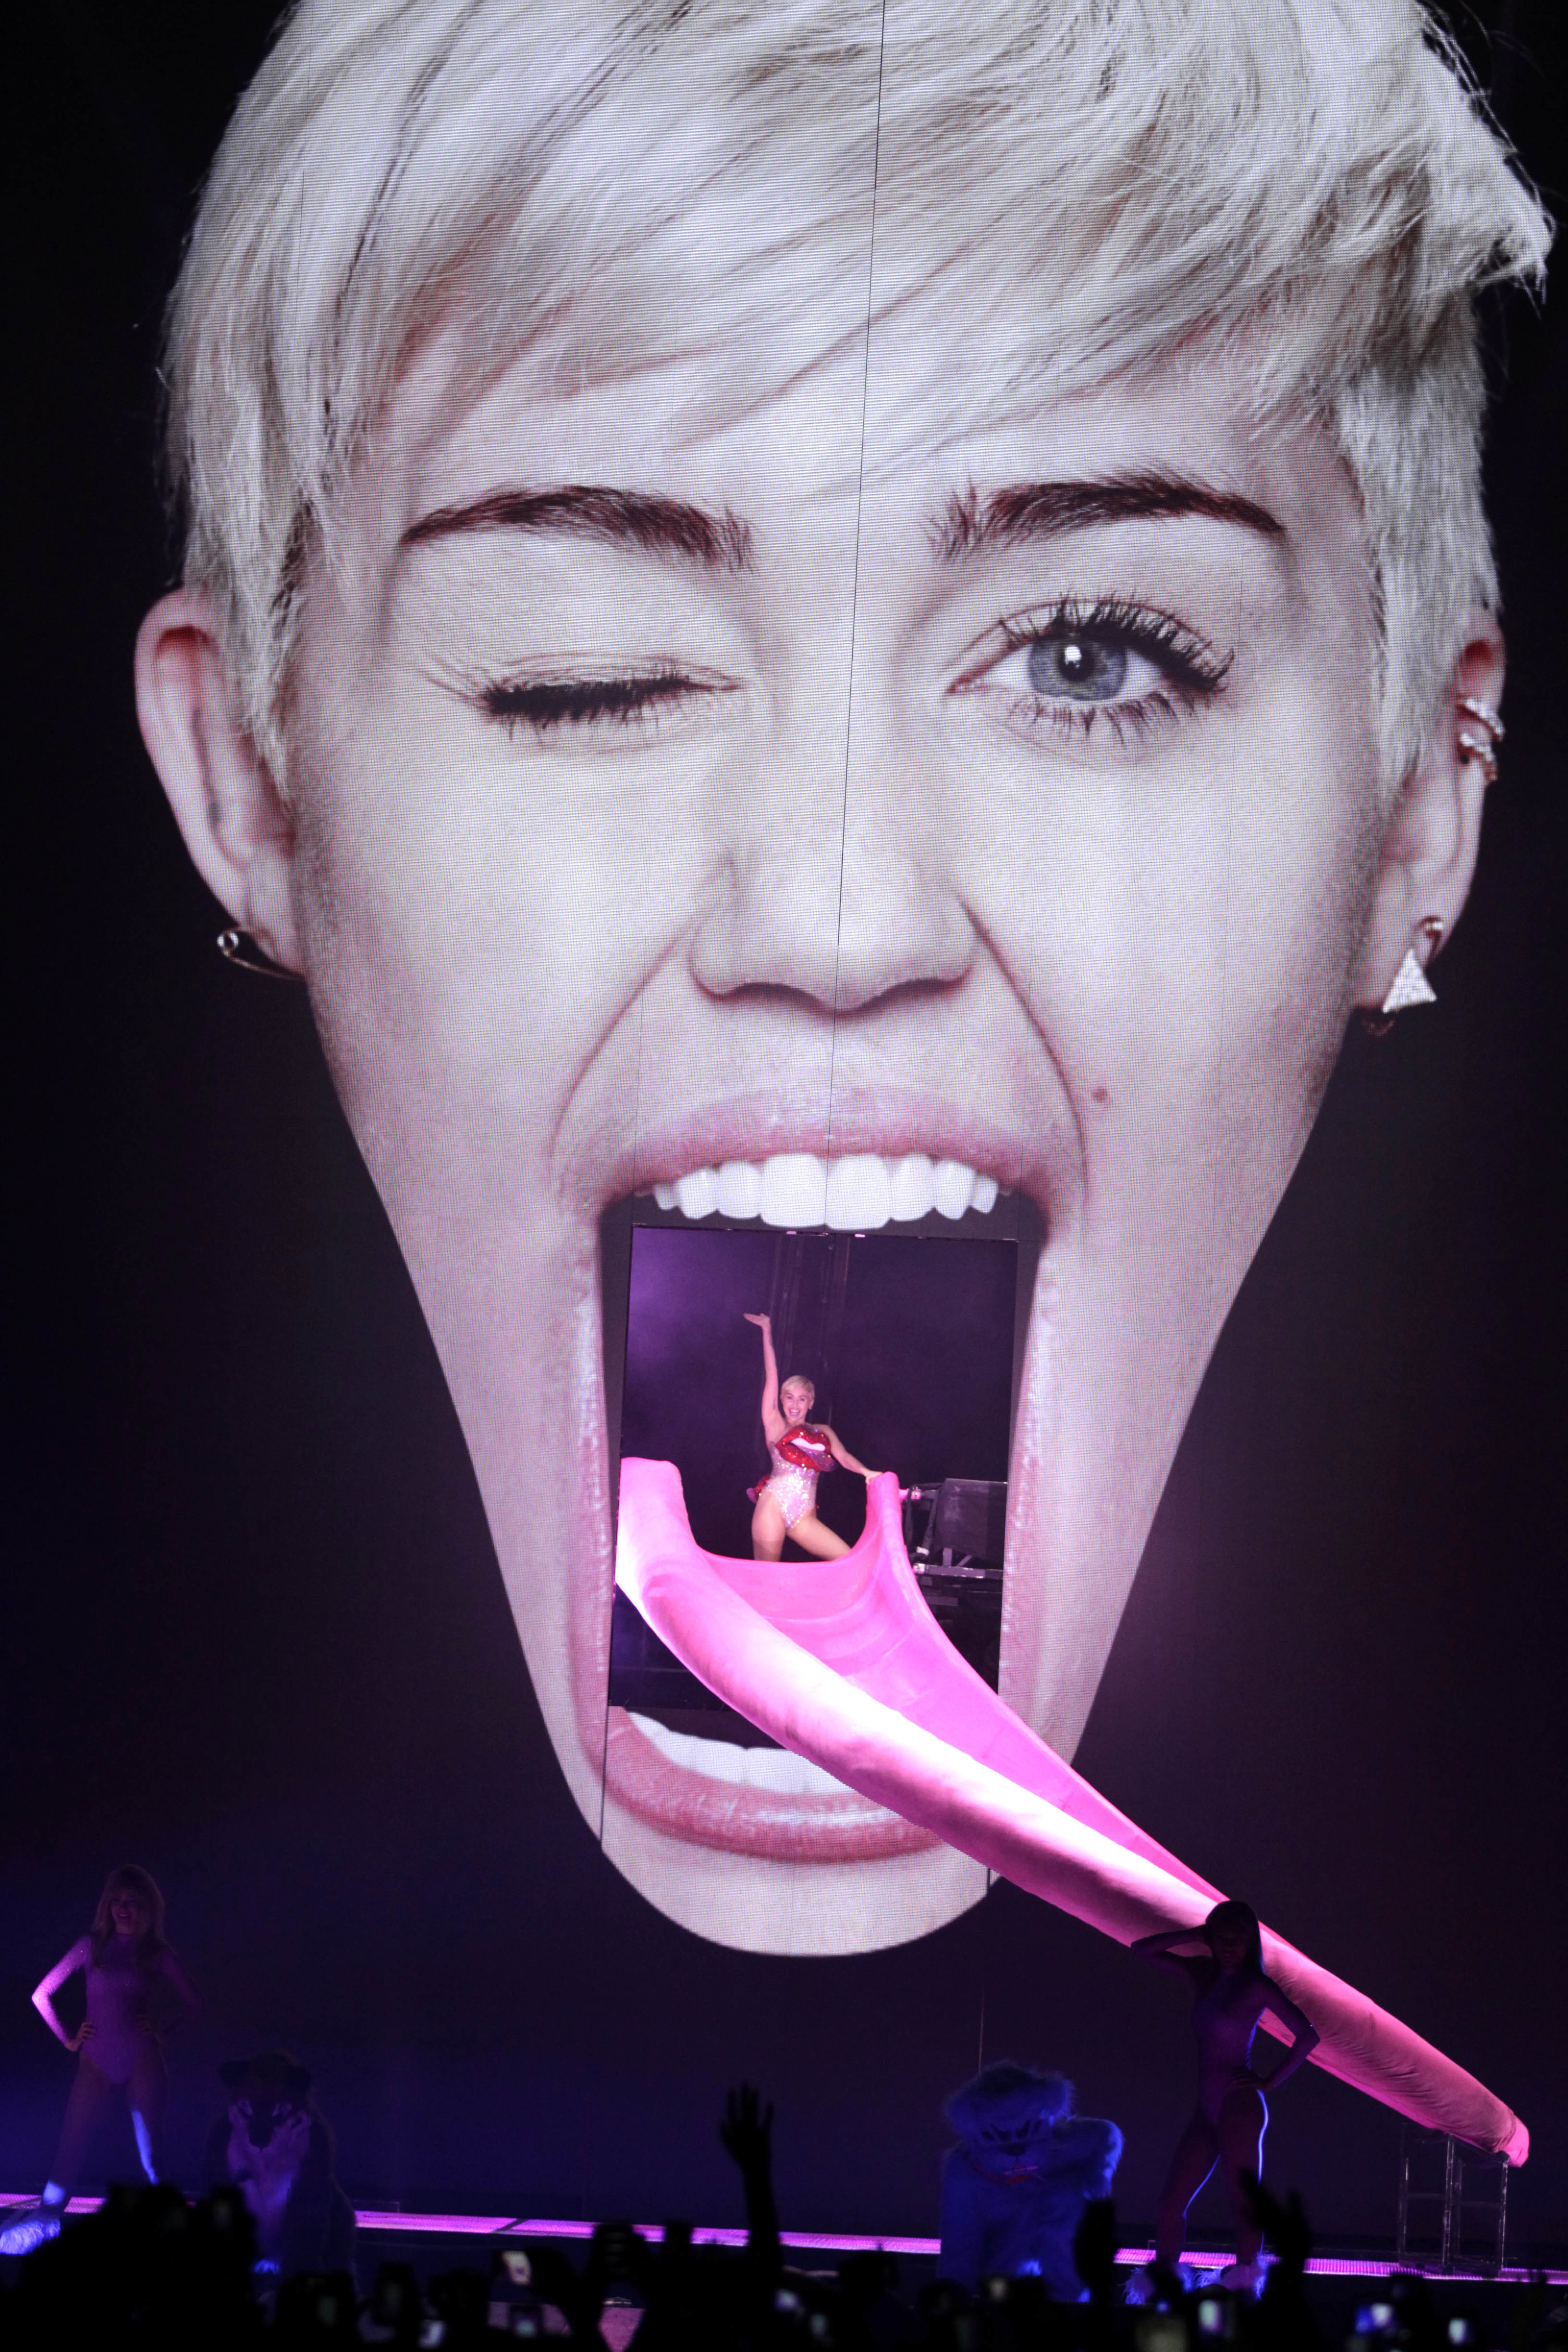 miley at the top of her tongue slide